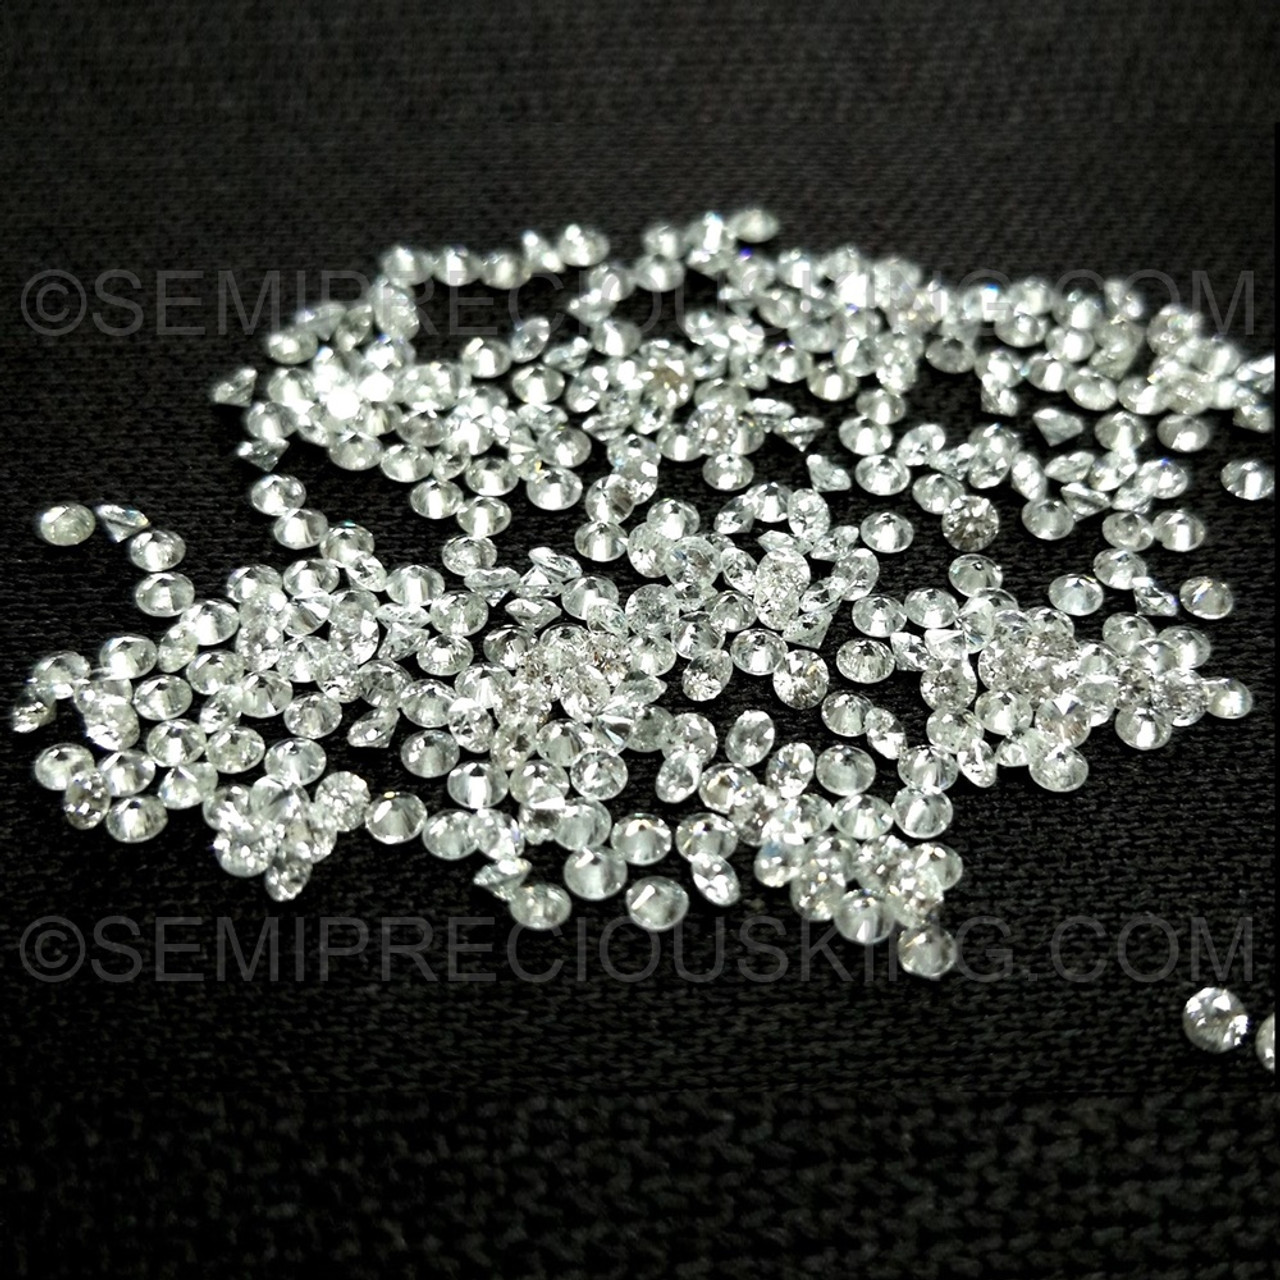 Details about   1-1.1mm 50pc Natural Loose Single Cut Diamond J Color SI Clarity Round 17 Facets 